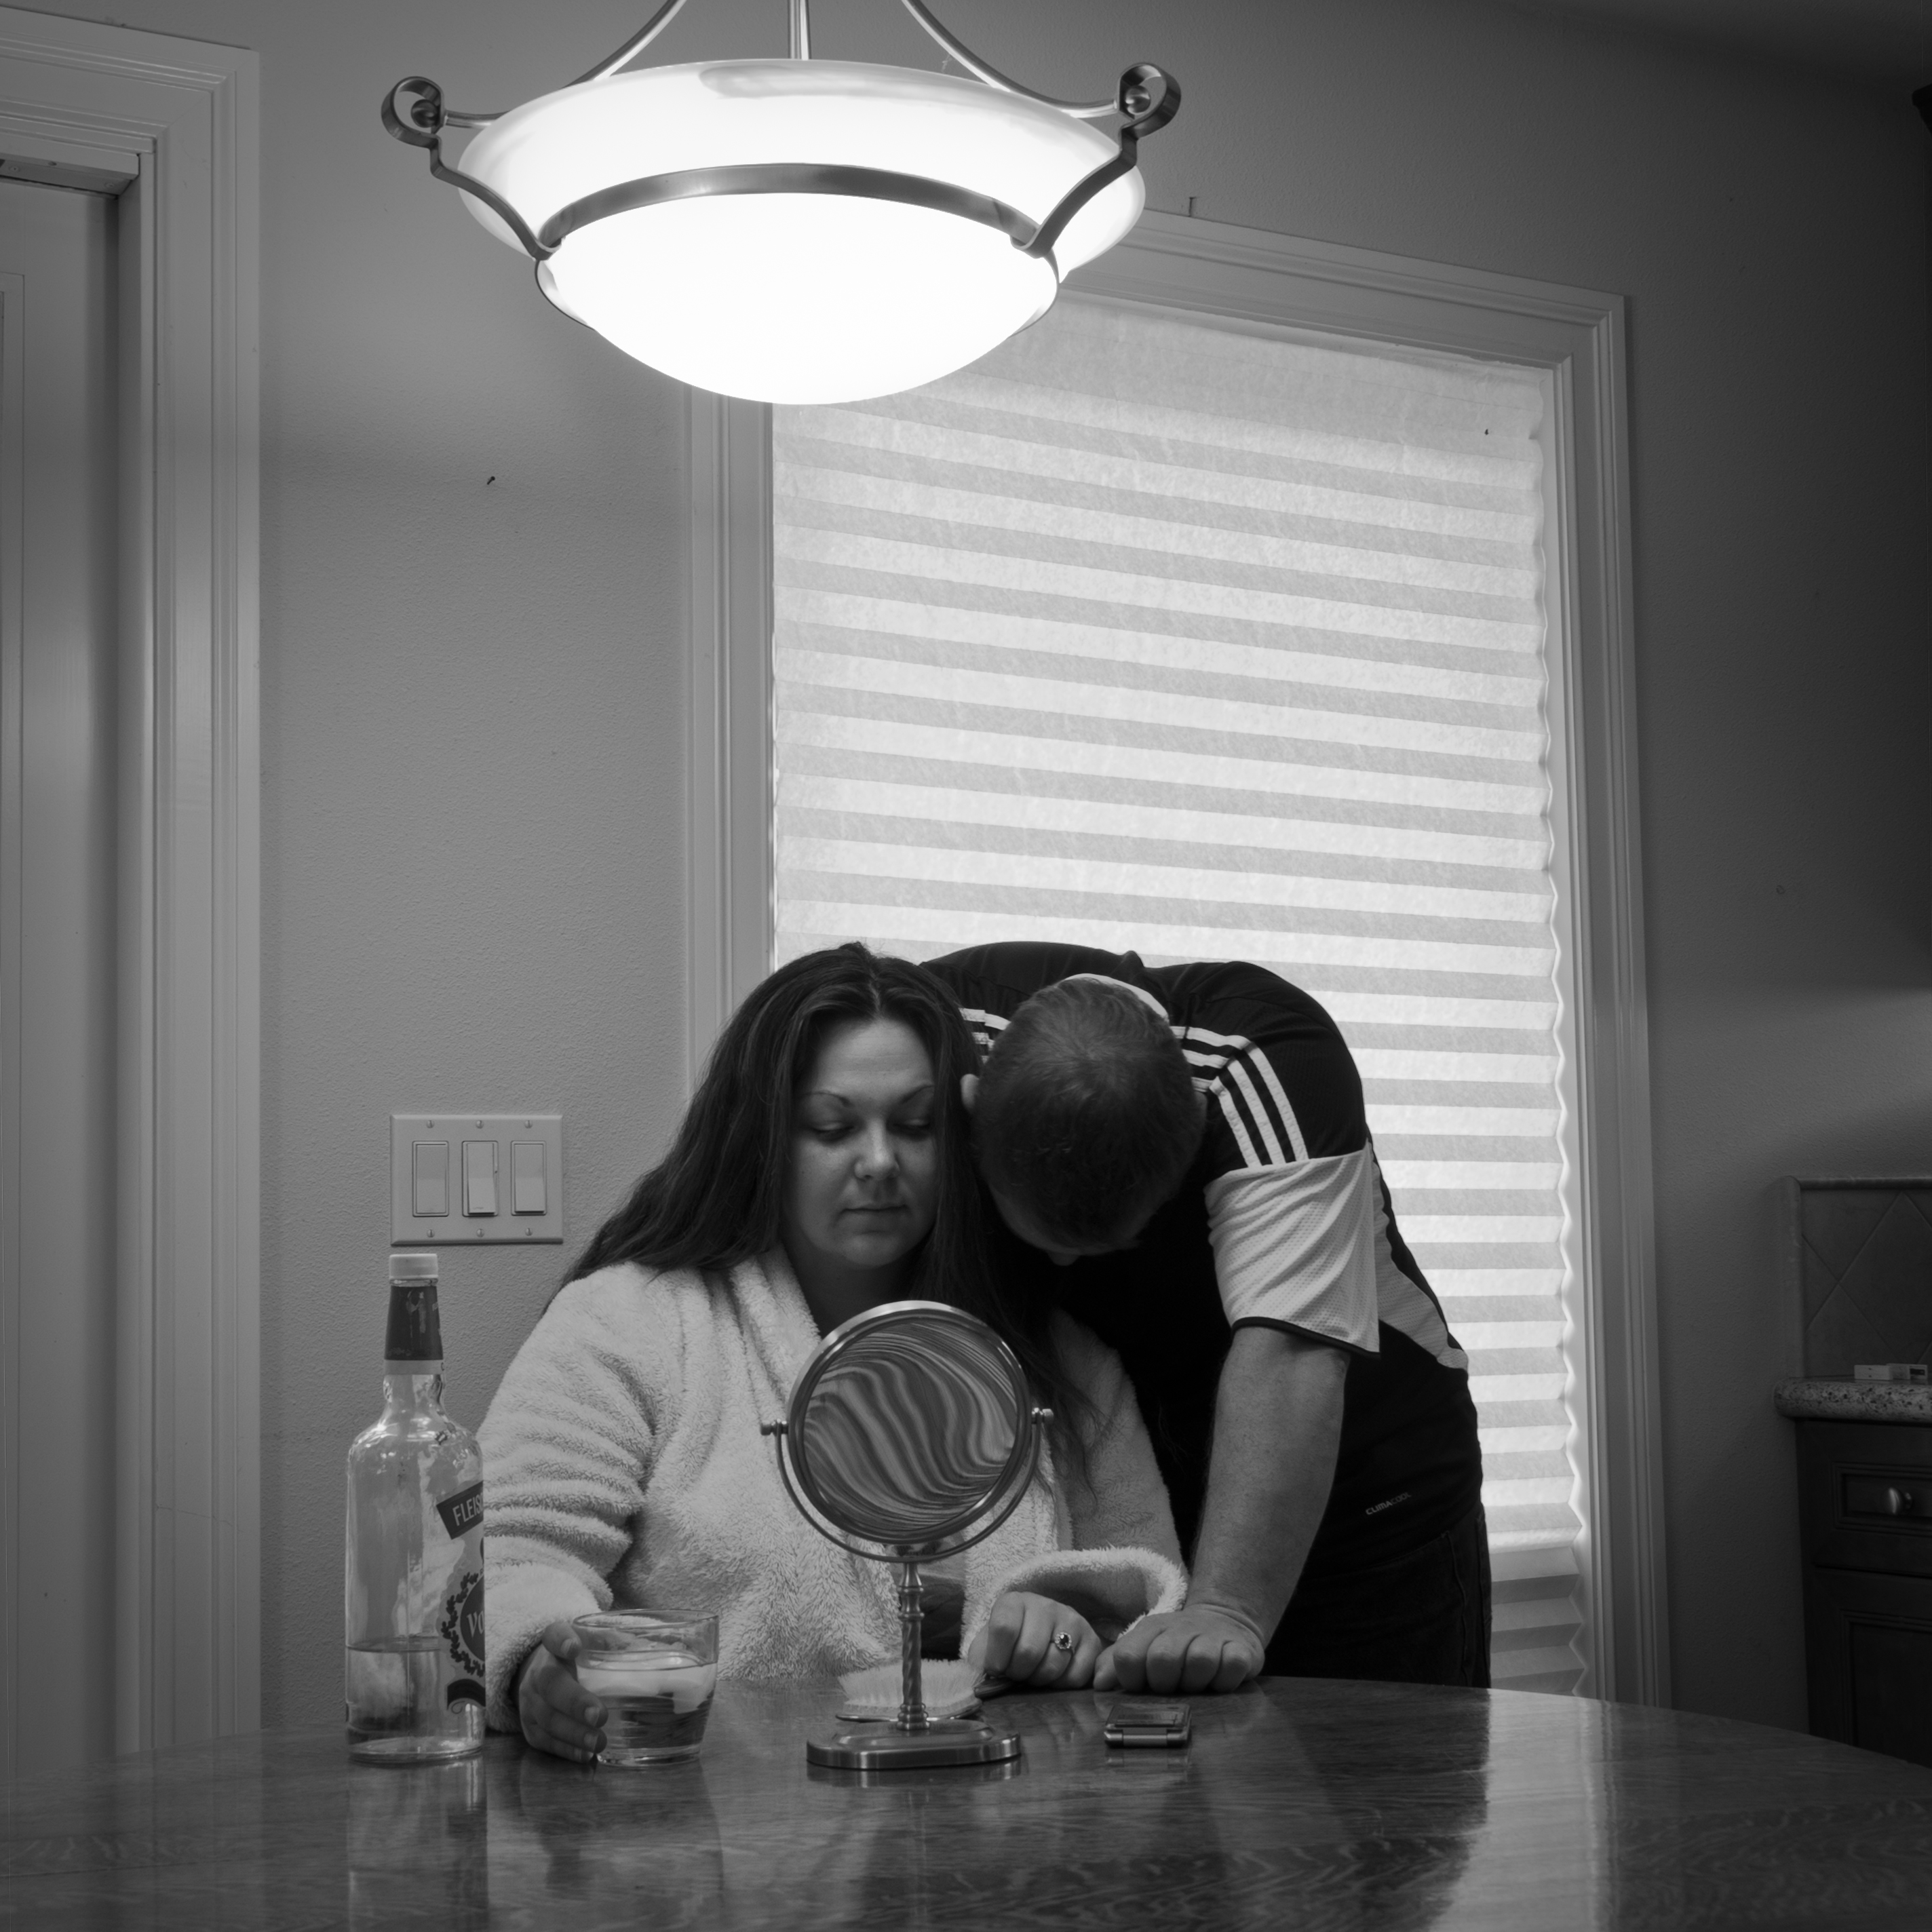 Variations On Carrie Mae Weems Kitchen Table Series Social Change And New Media